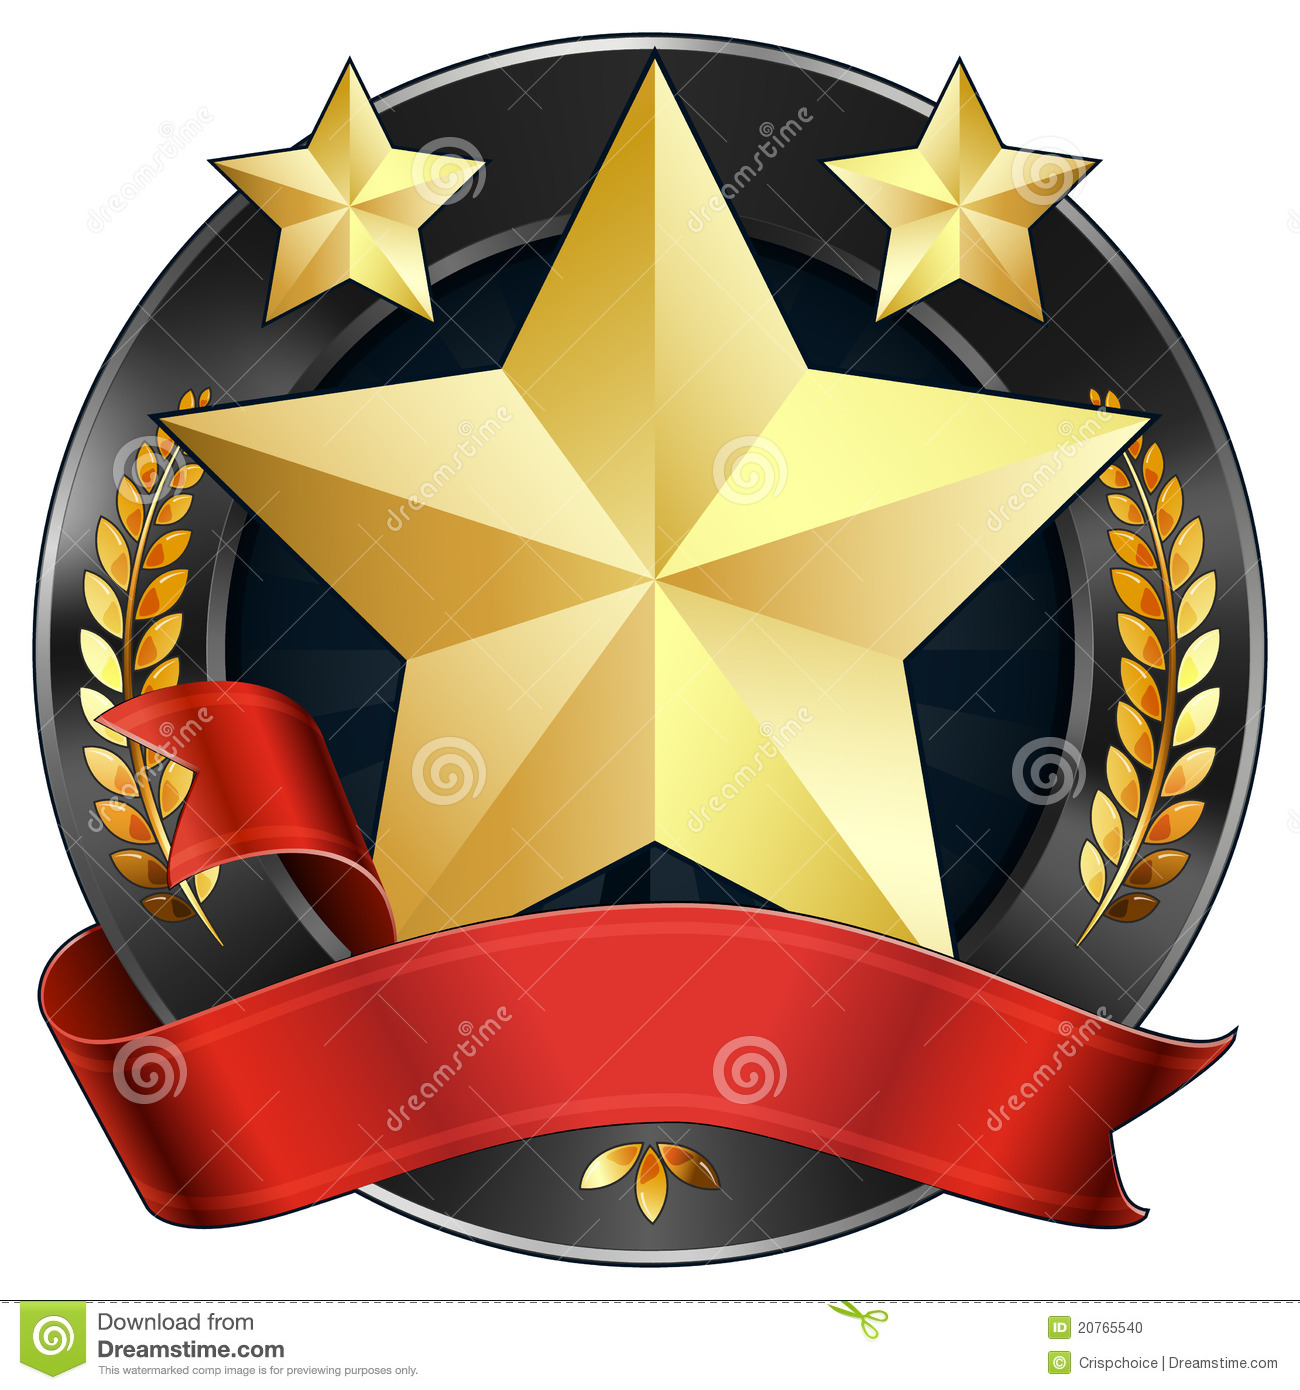 Achievement Award Star In Gold With Red Ribbon Stock Photo   Image    